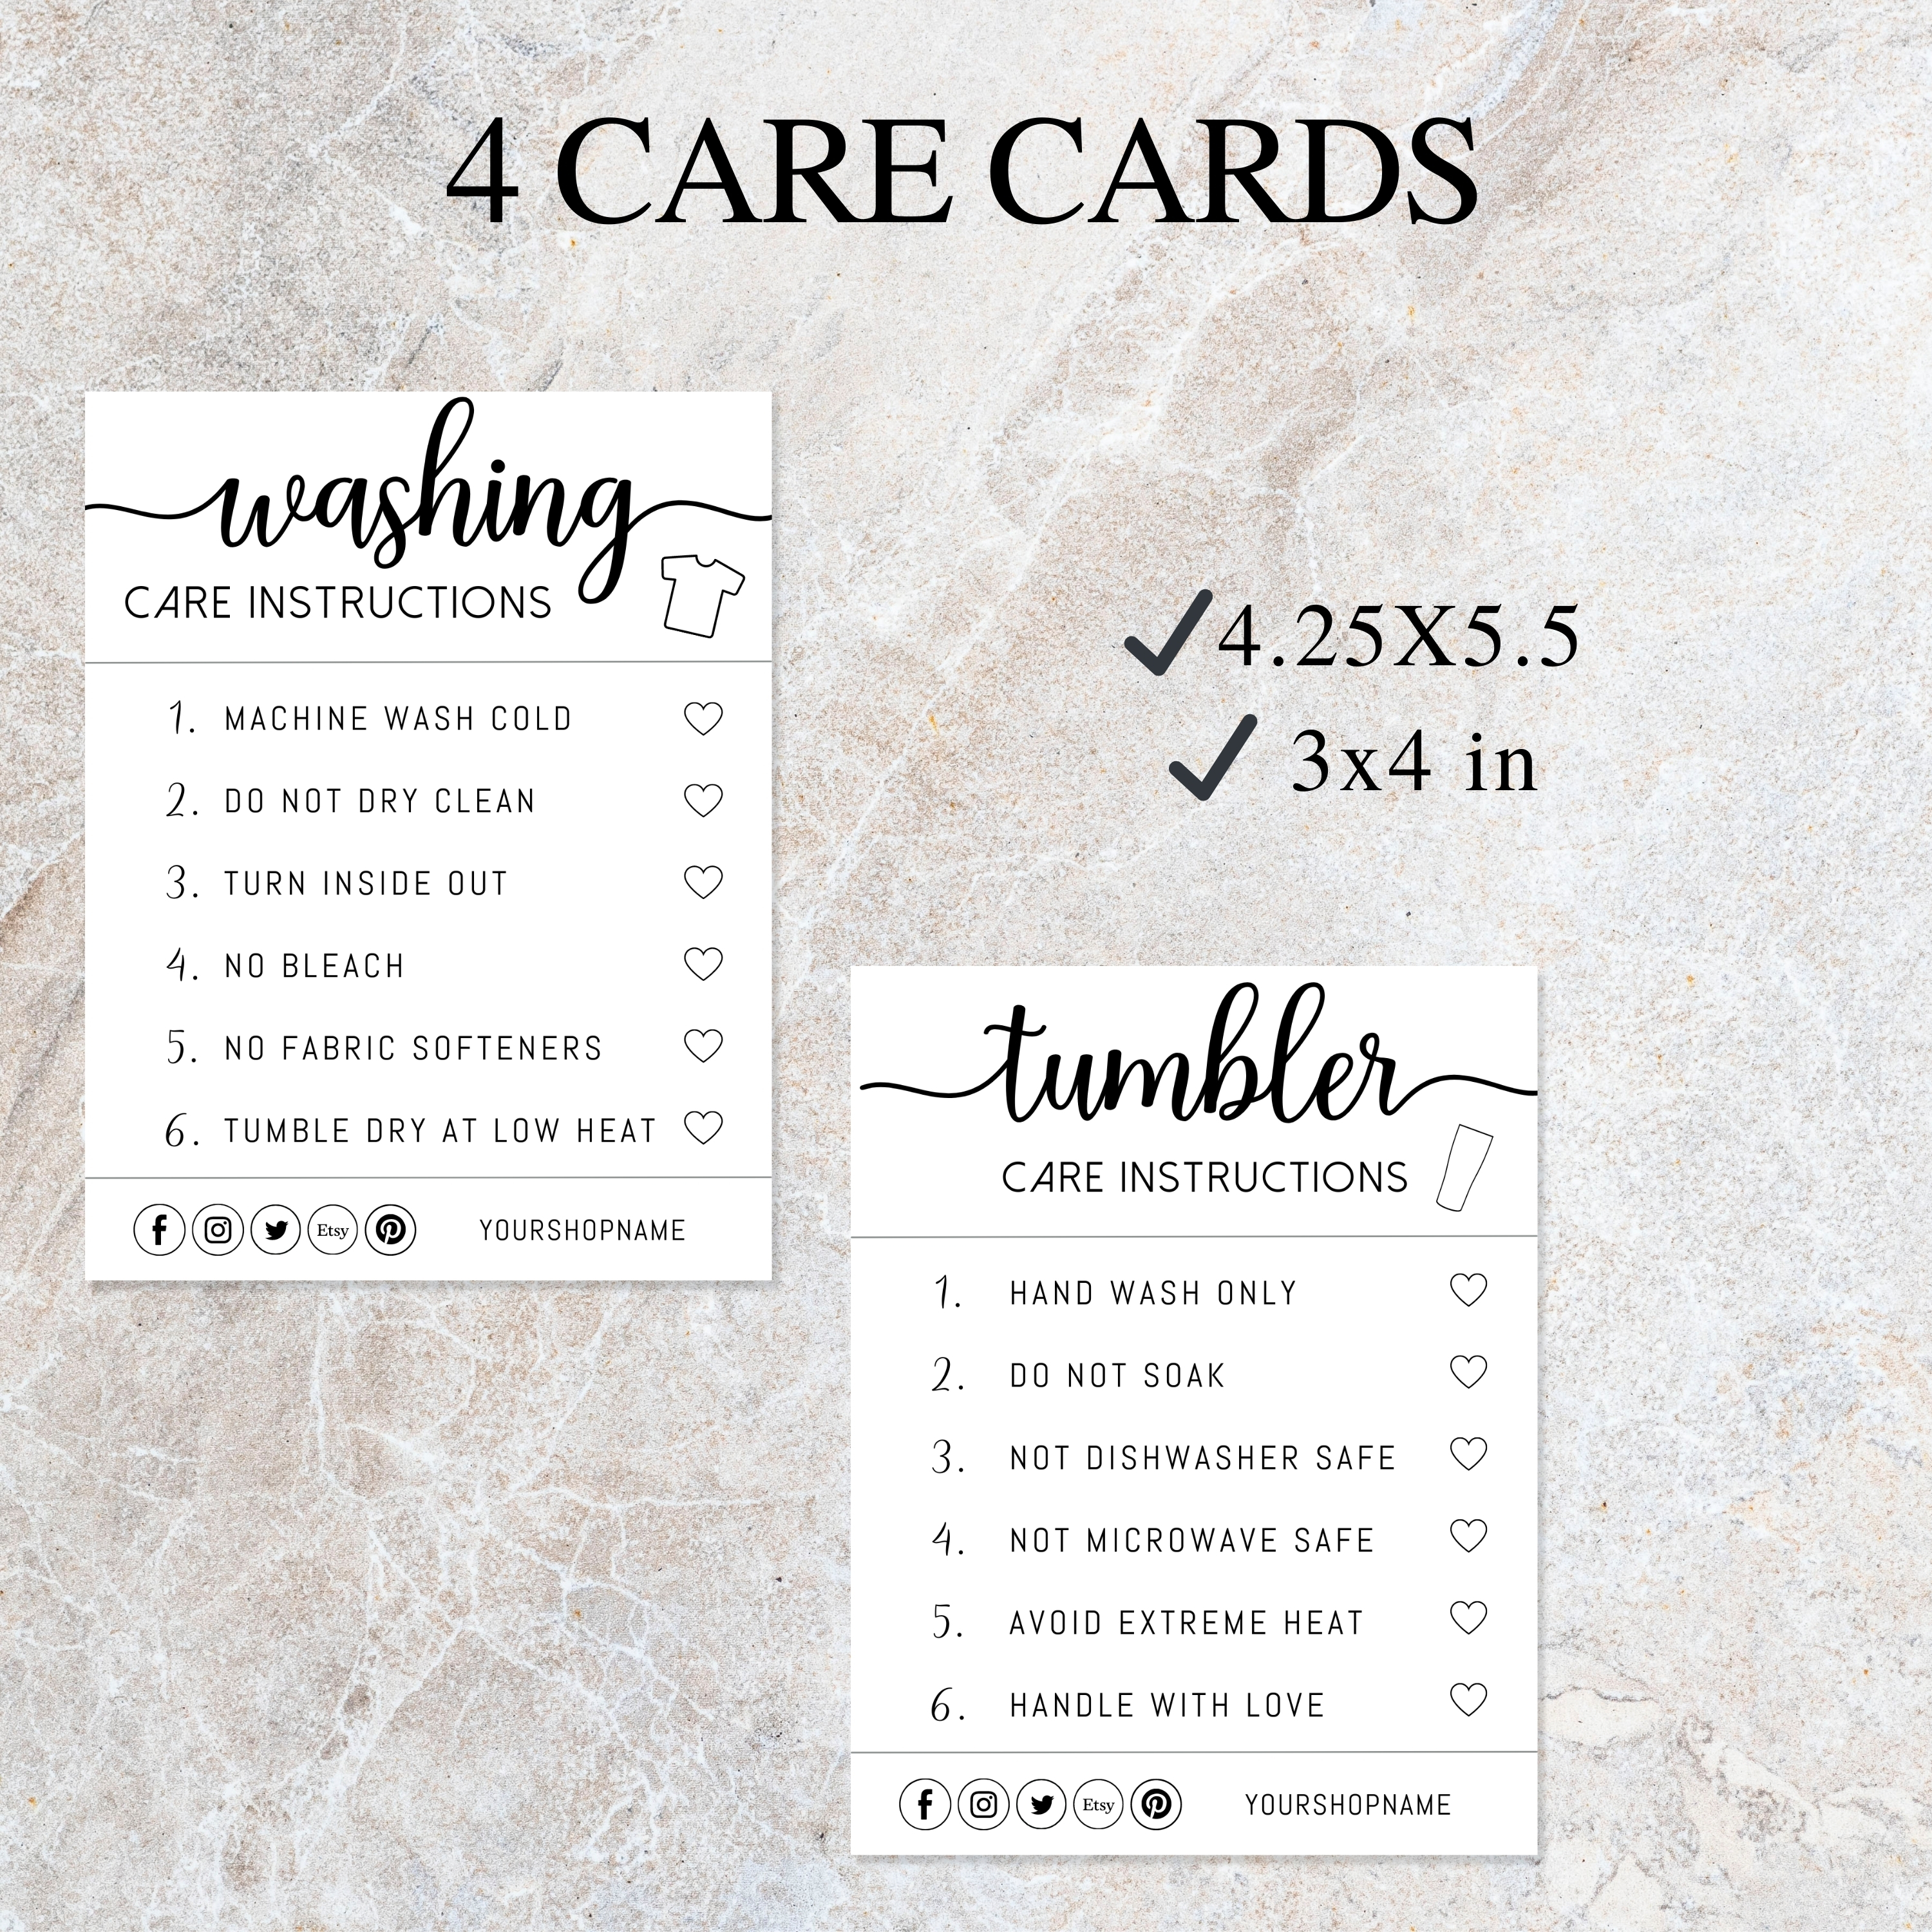 order form canva template